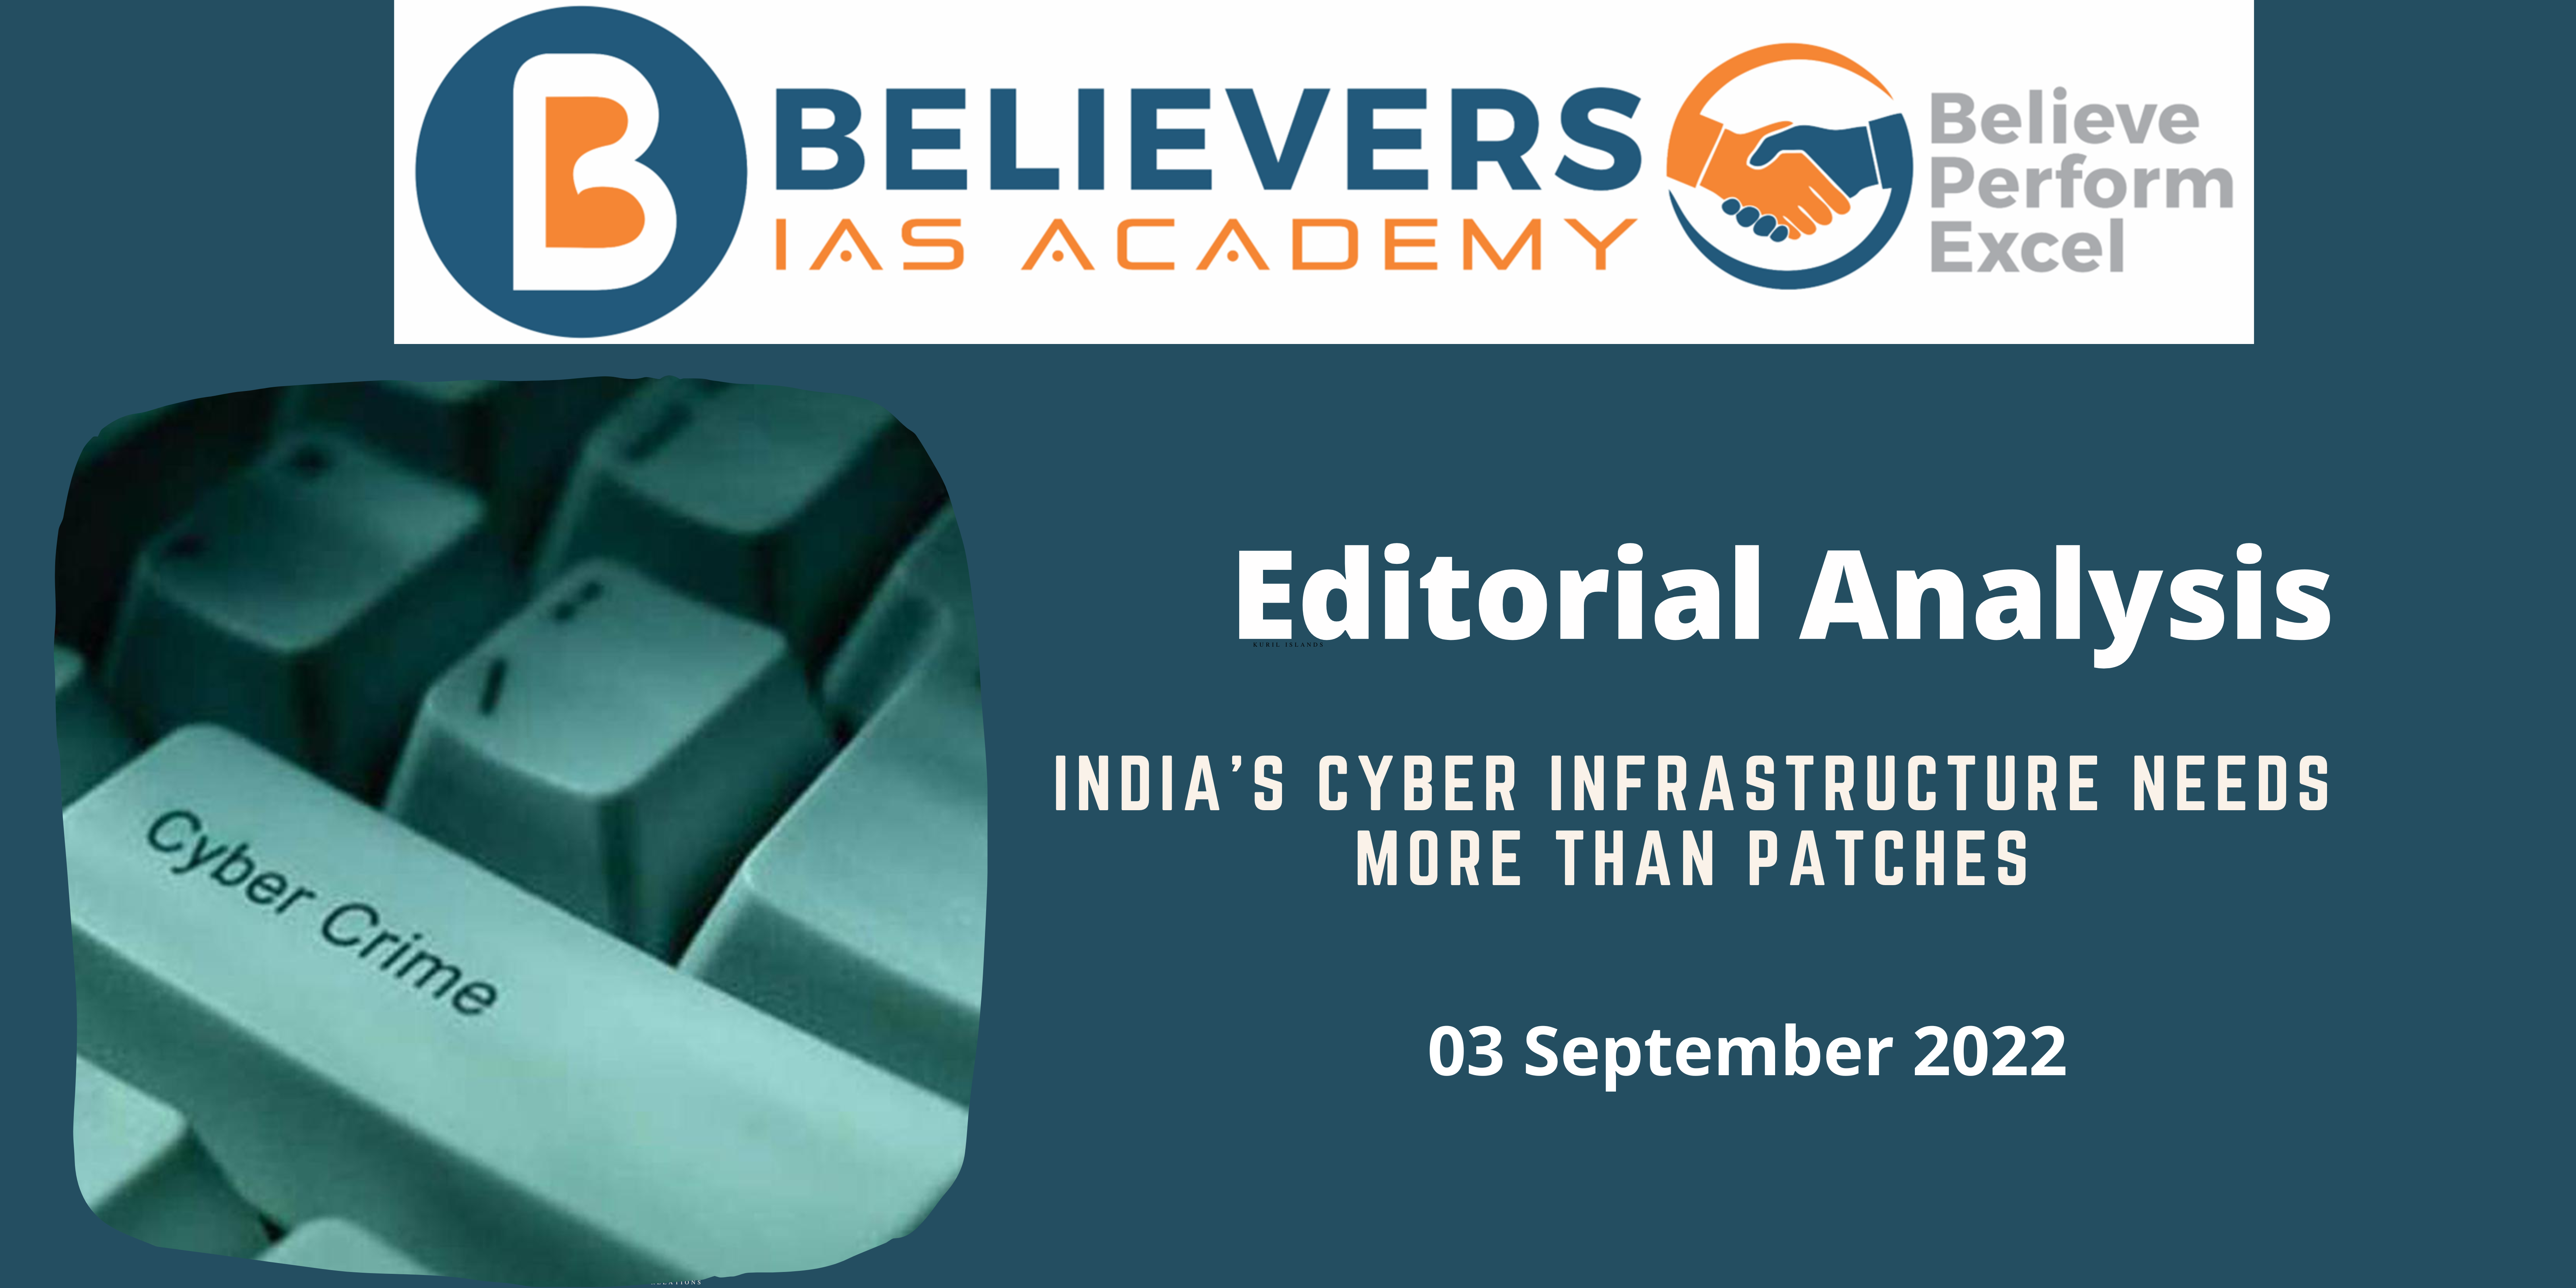 India’s cyber infrastructure needs more than patches